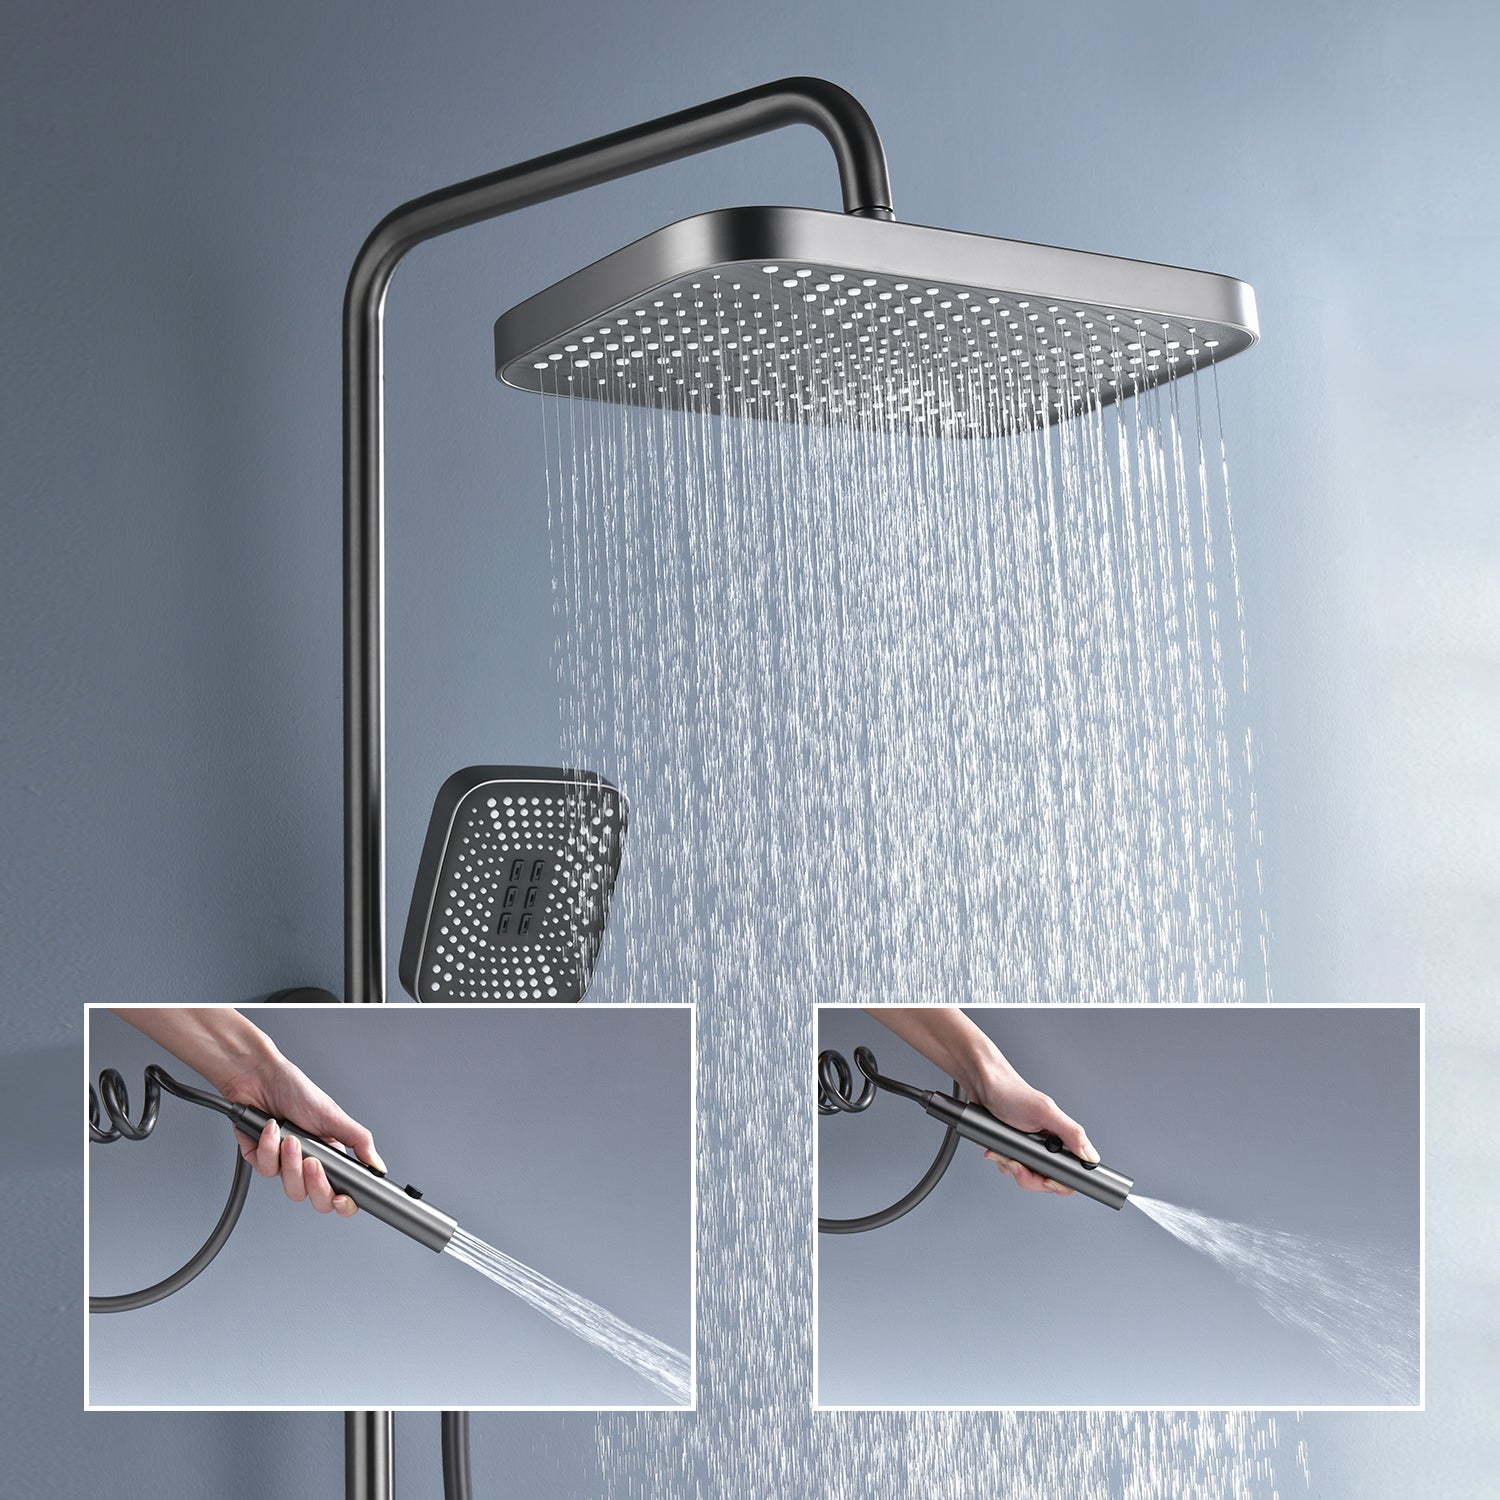 Lefton All-In-One Shower System with Temperature Display and 4 Water Outlet Modes